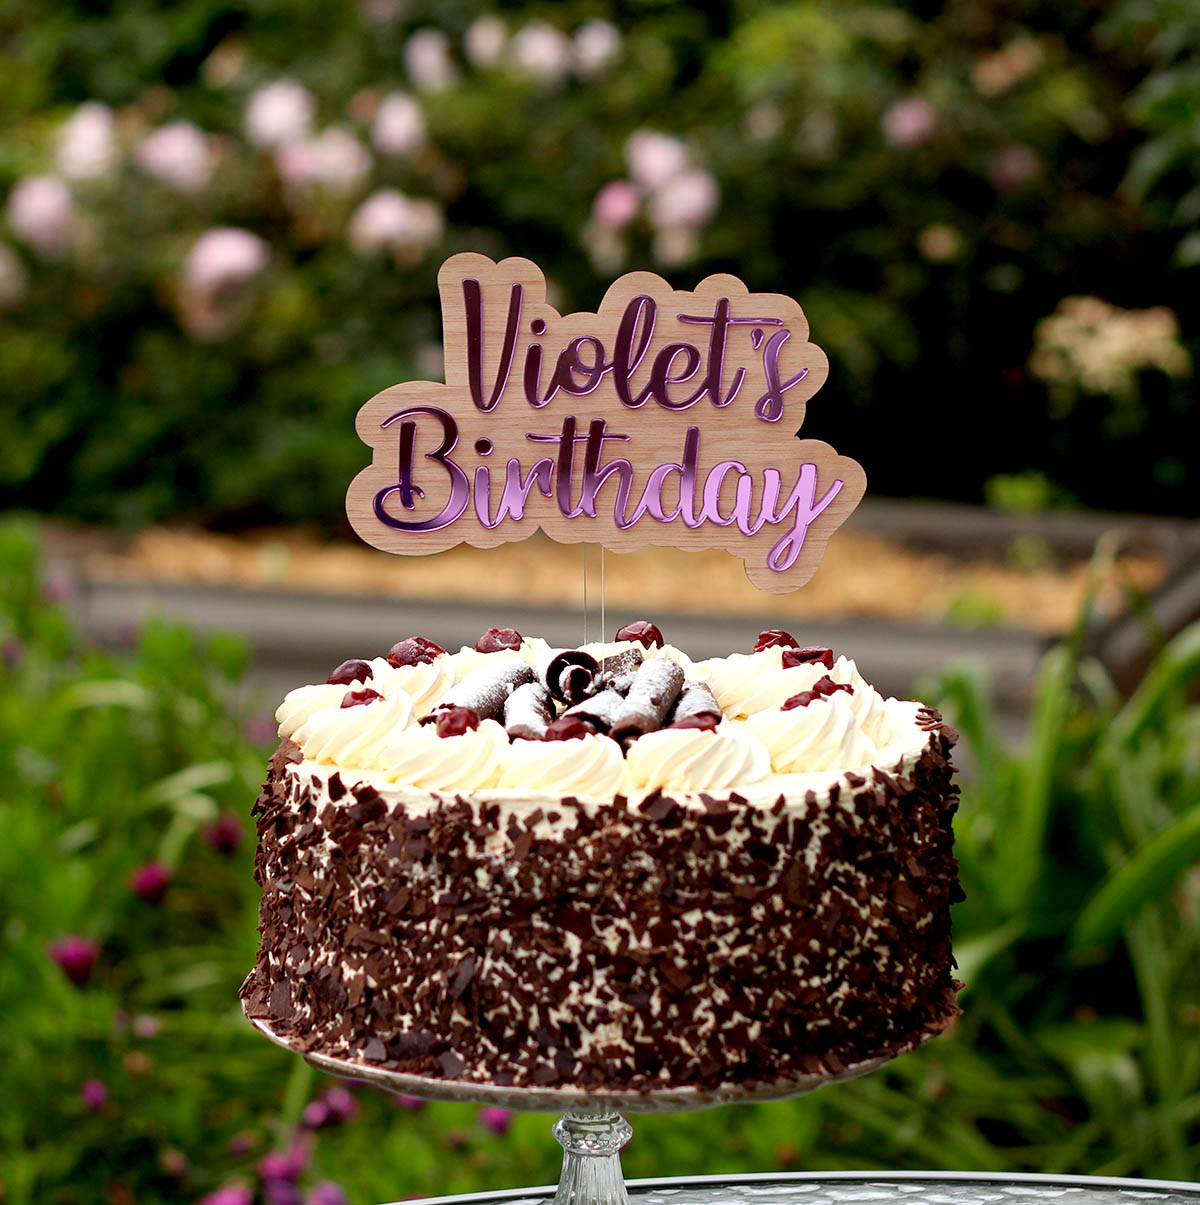 acrylic and wood cake topper in a cake that says Violet's birthday in purple mirror